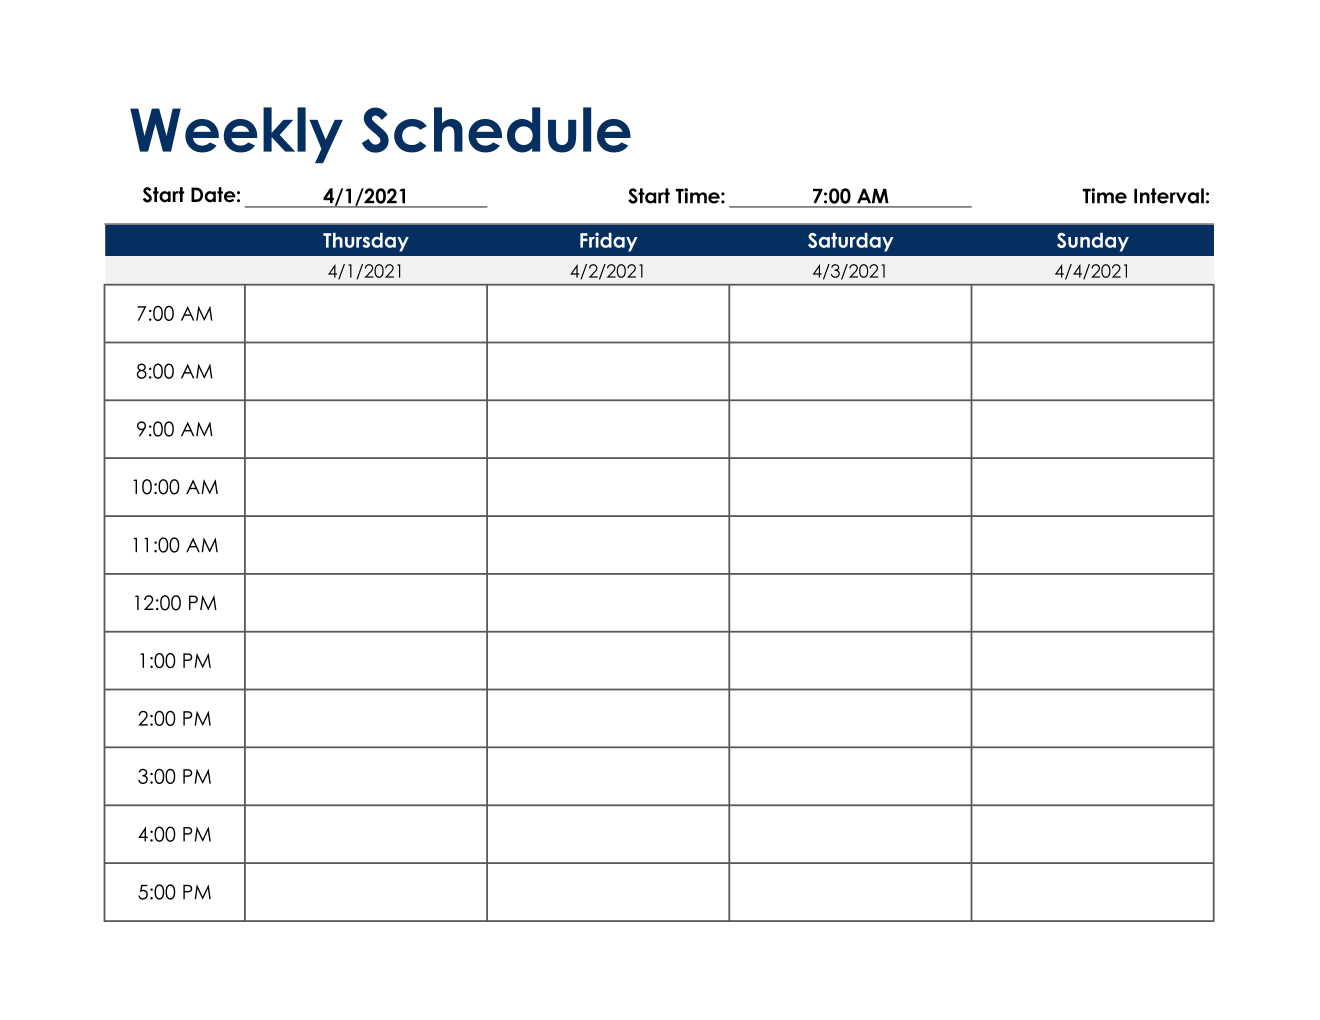 What is a week schedule template, and why is it important? BPI The